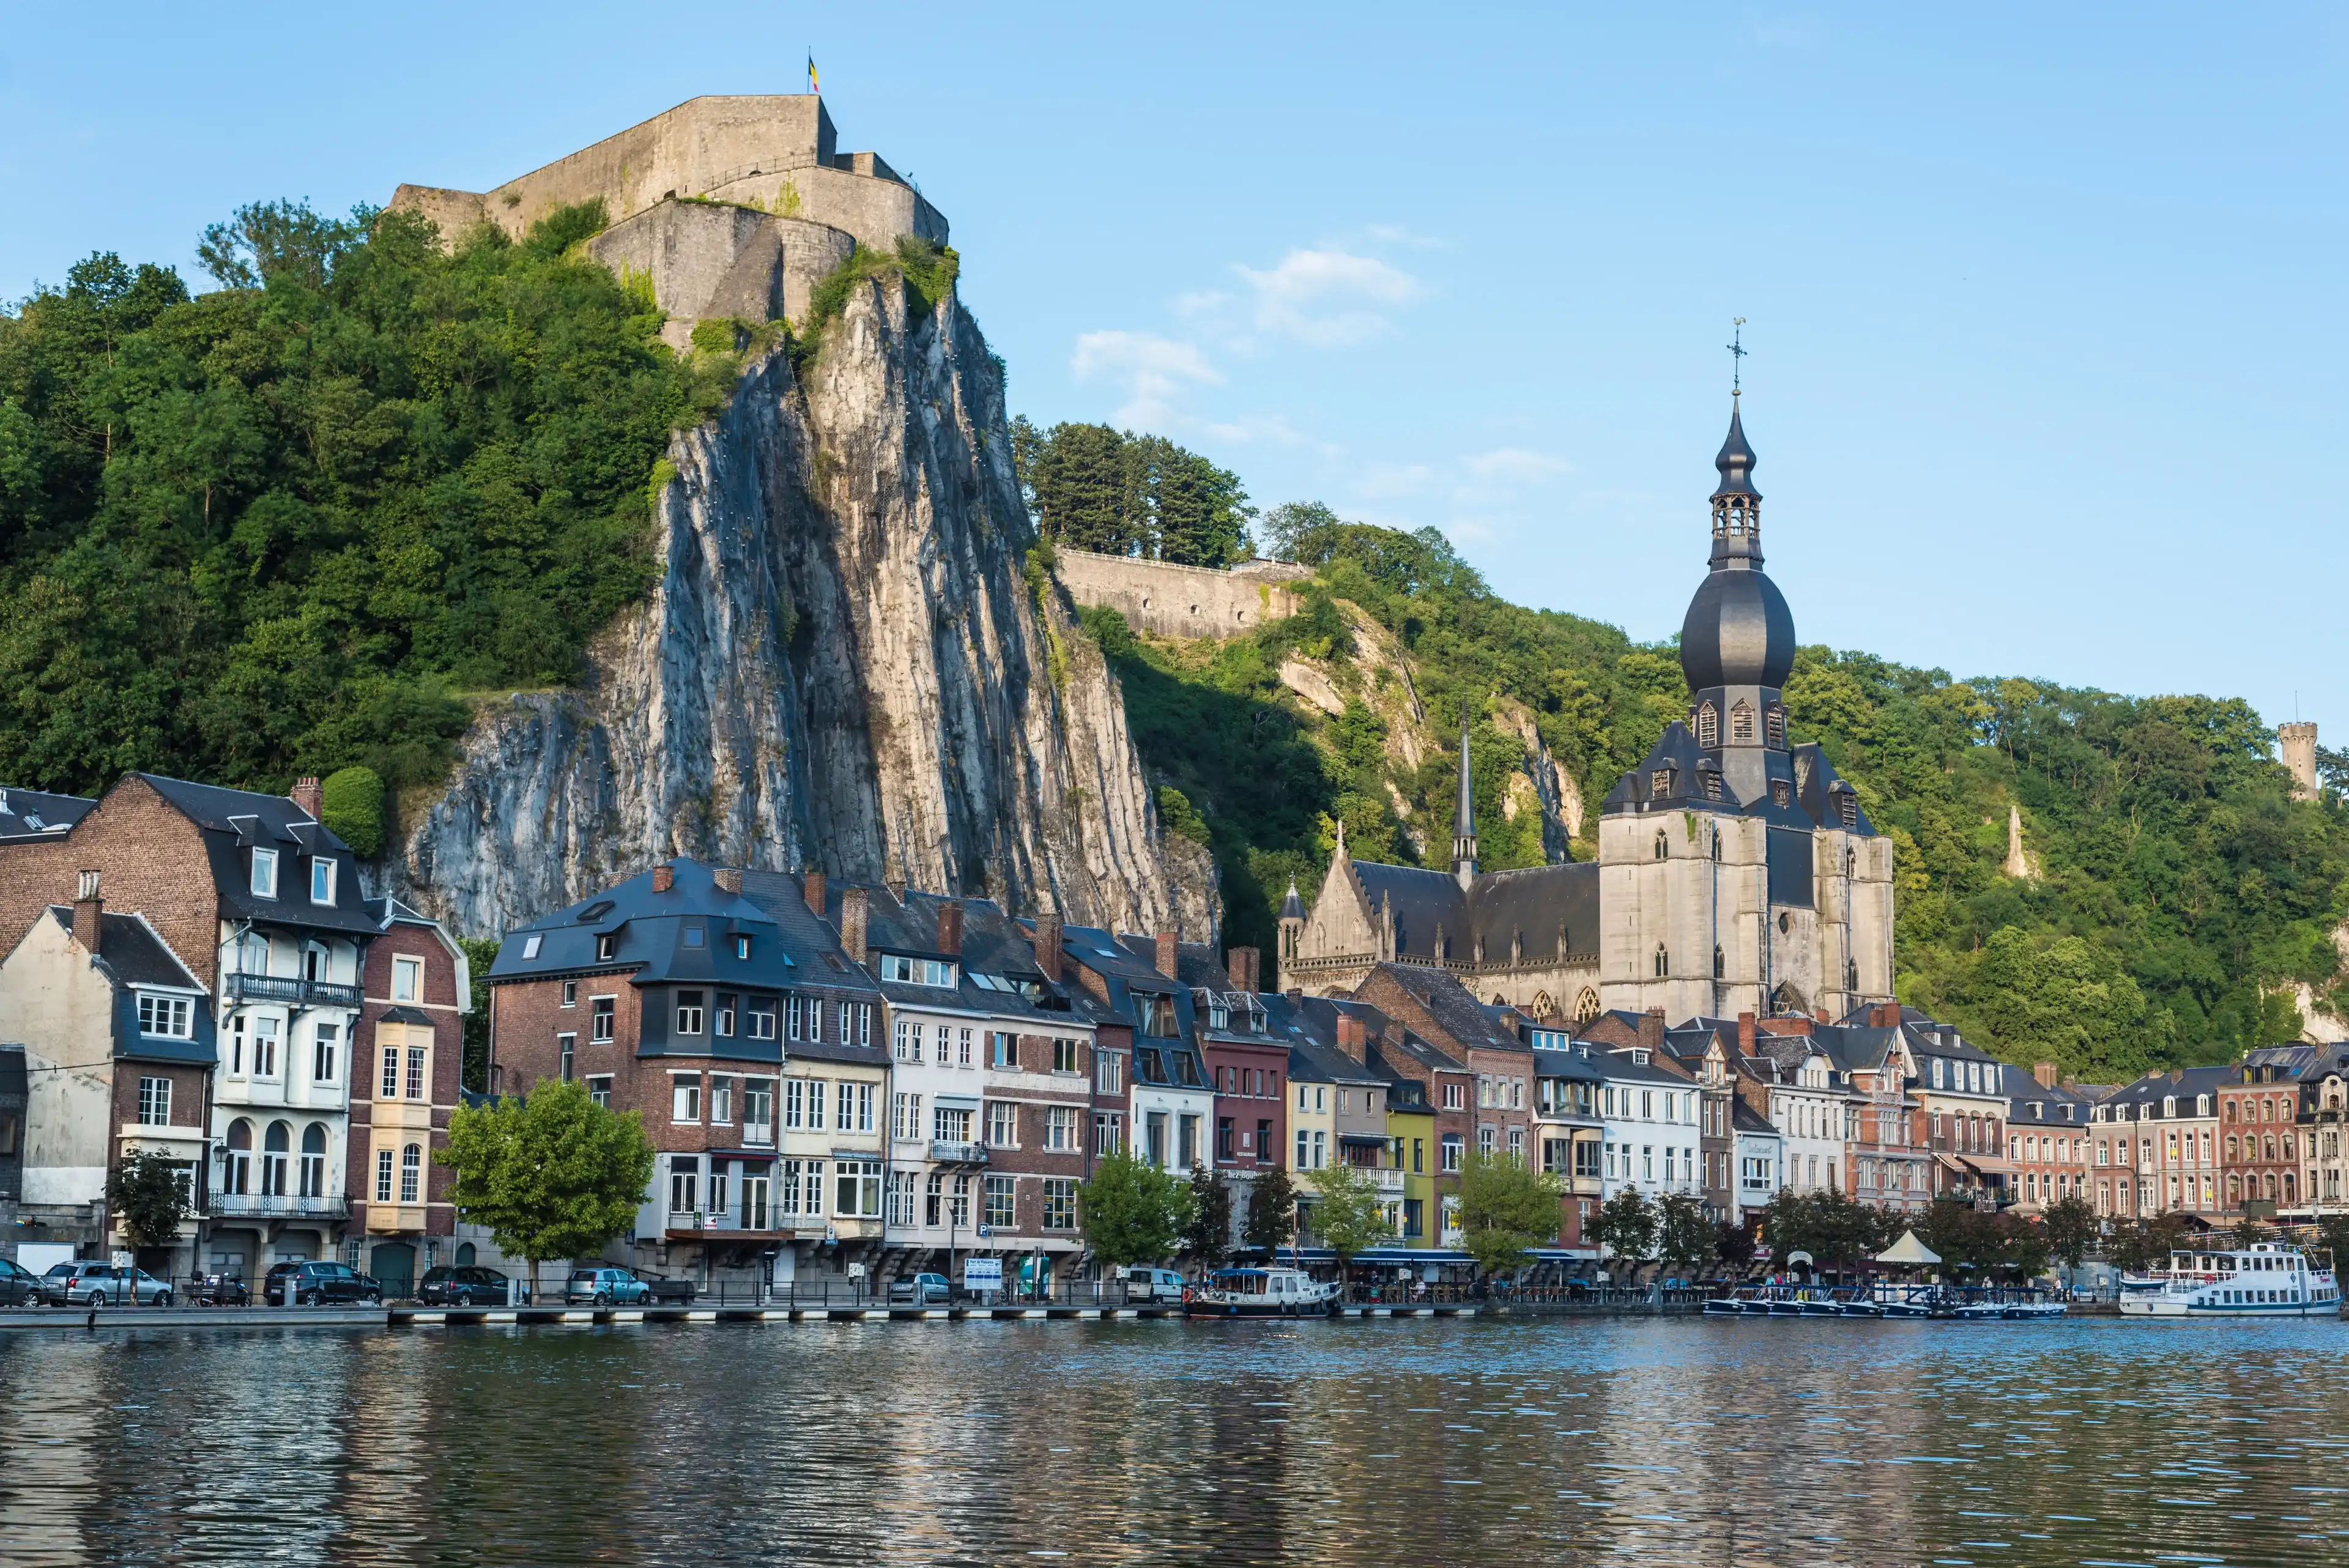 Best Dinant hotels. Cheap hotels in Dinant, Belgium